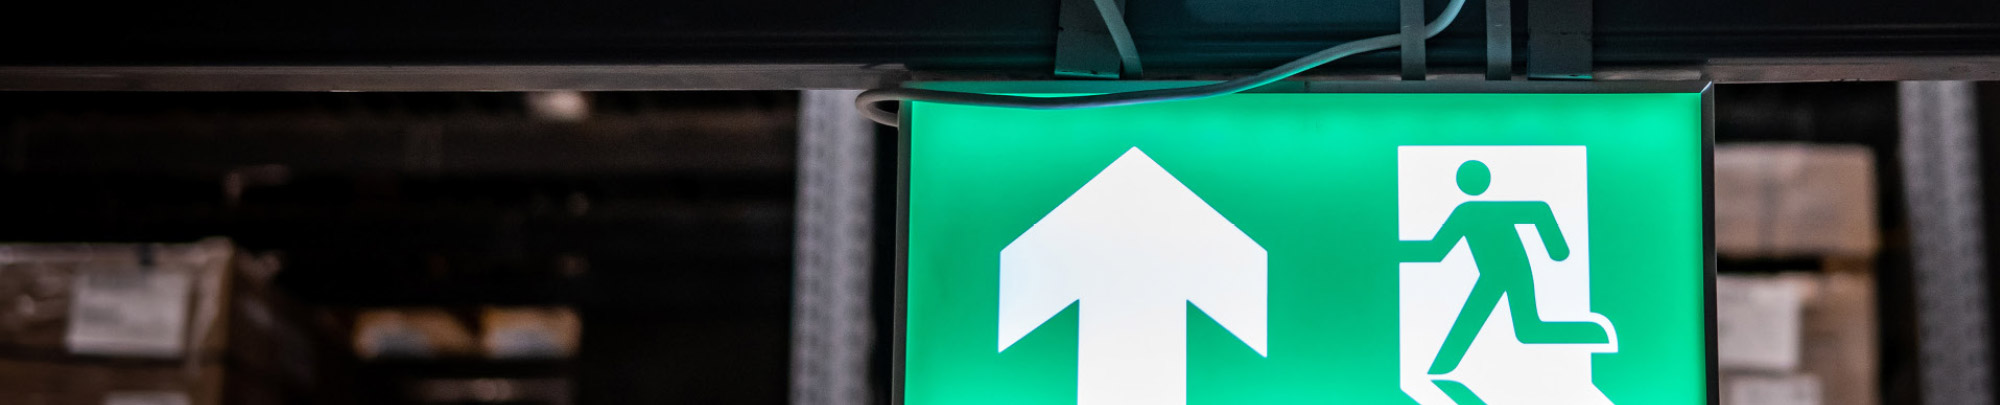 Green Emergency Exit Sign Lit Up